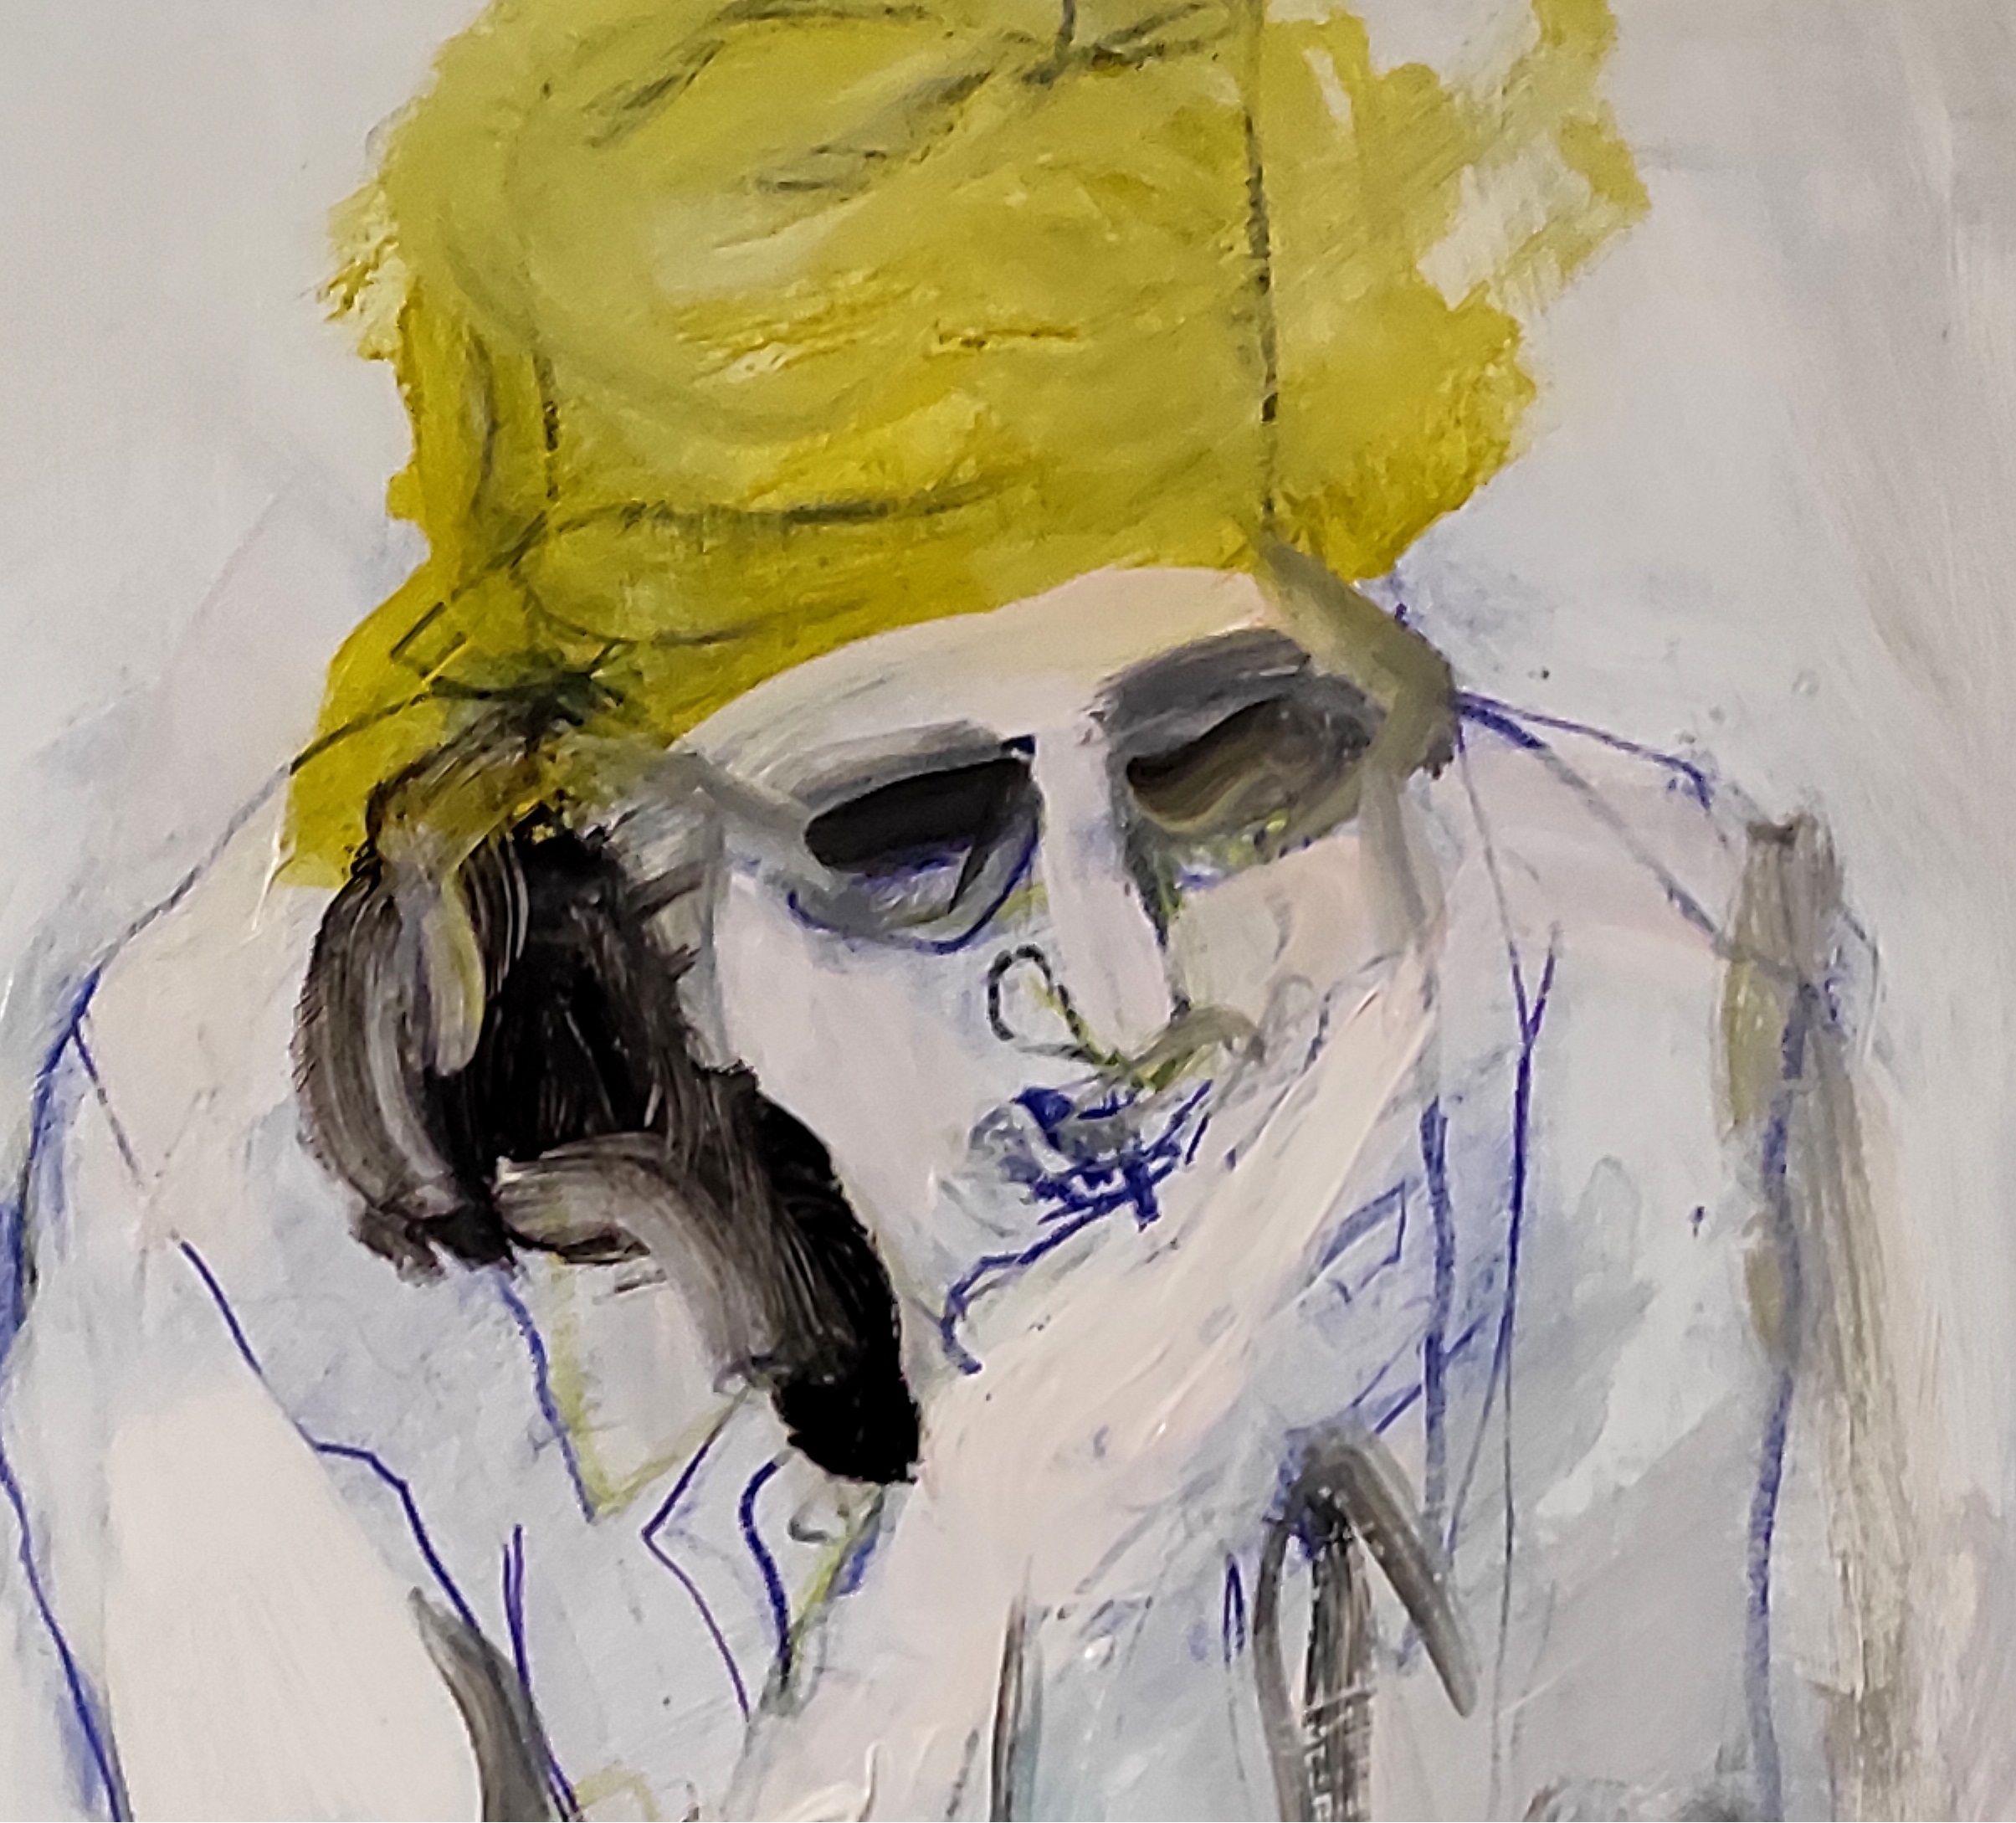 Seated old woman, Drawing, Pencil/Colored Pencil on Paper - Expressionist Art by Barbara Kroll